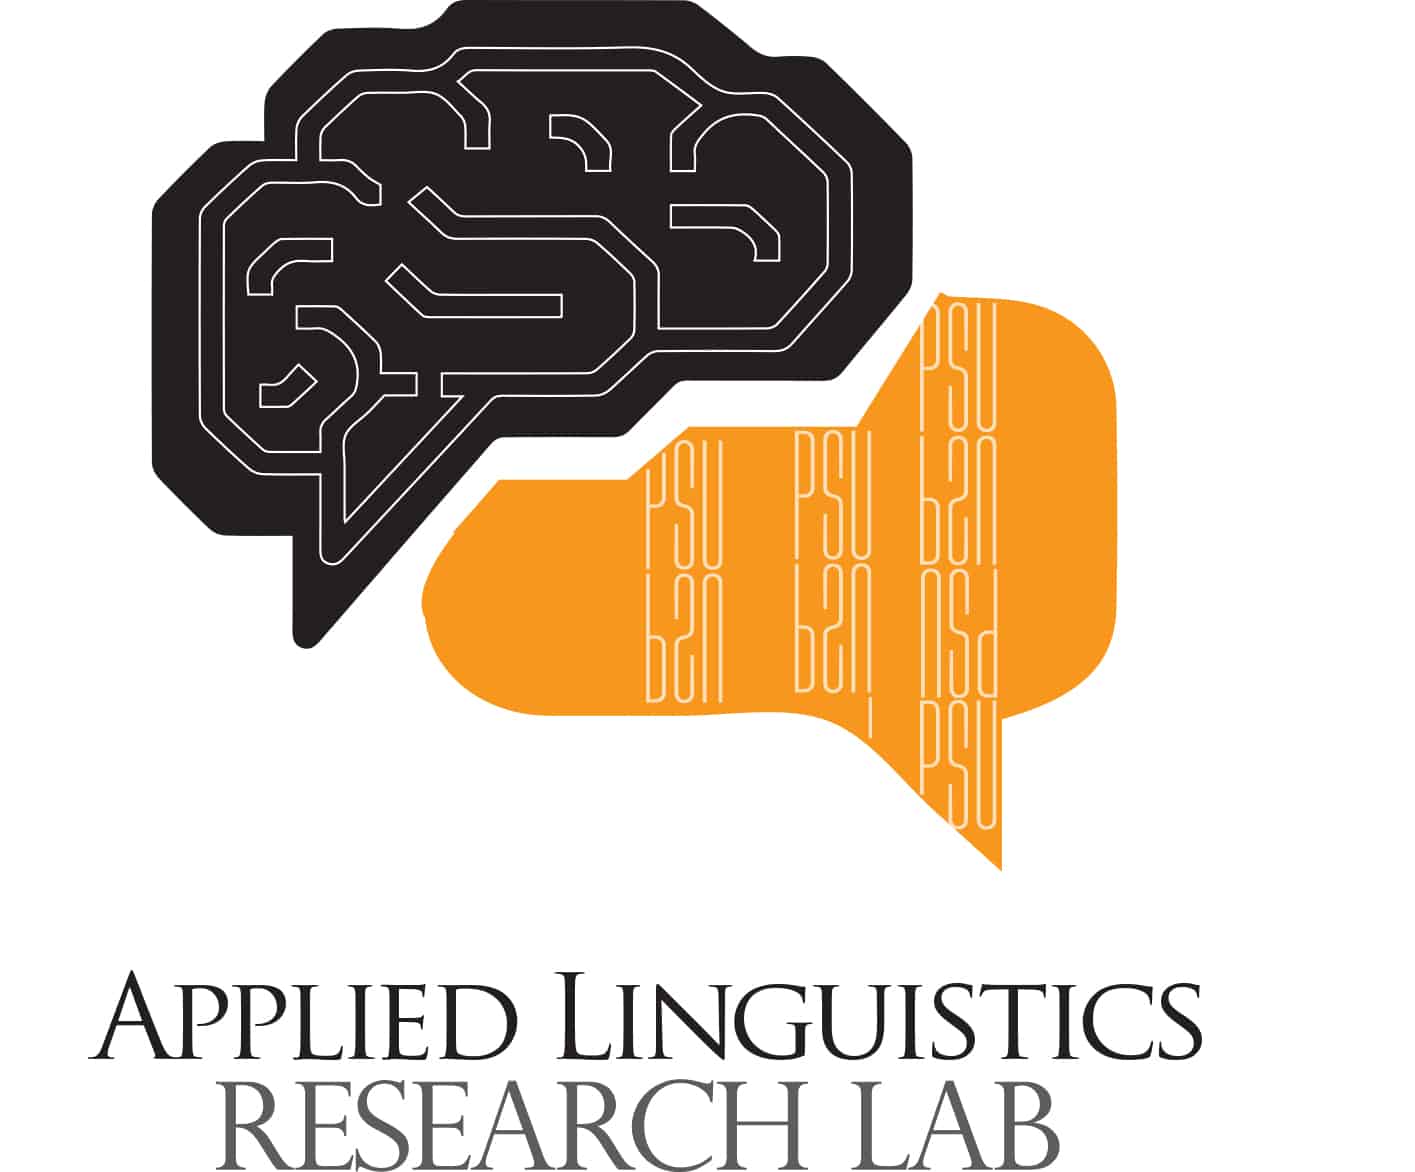 The Applied Linguistics Research Lab Delivers an 8-Hour Training Program on Action Research to English Language Teachers